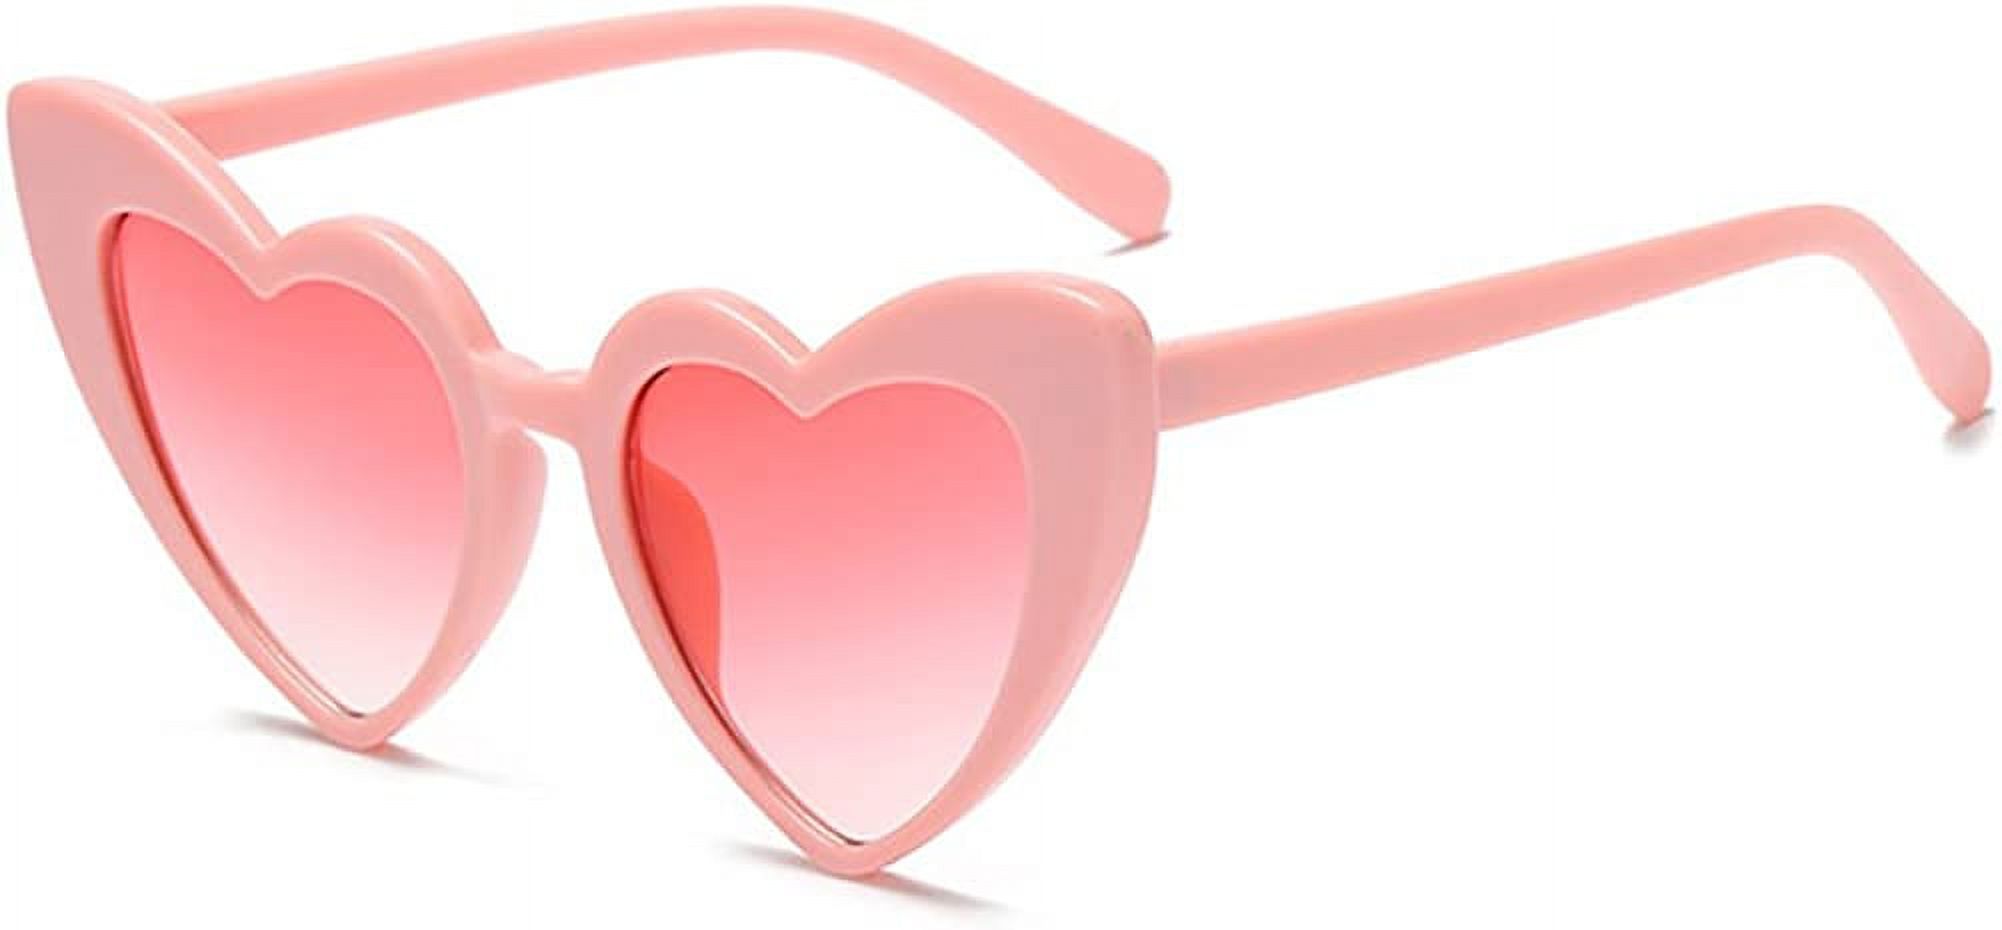 Love Heart Shaped Sunglasses for Women - Vintage Cat Eye Mod Style Retro Glasses as Birthday Gifts - image 1 of 7